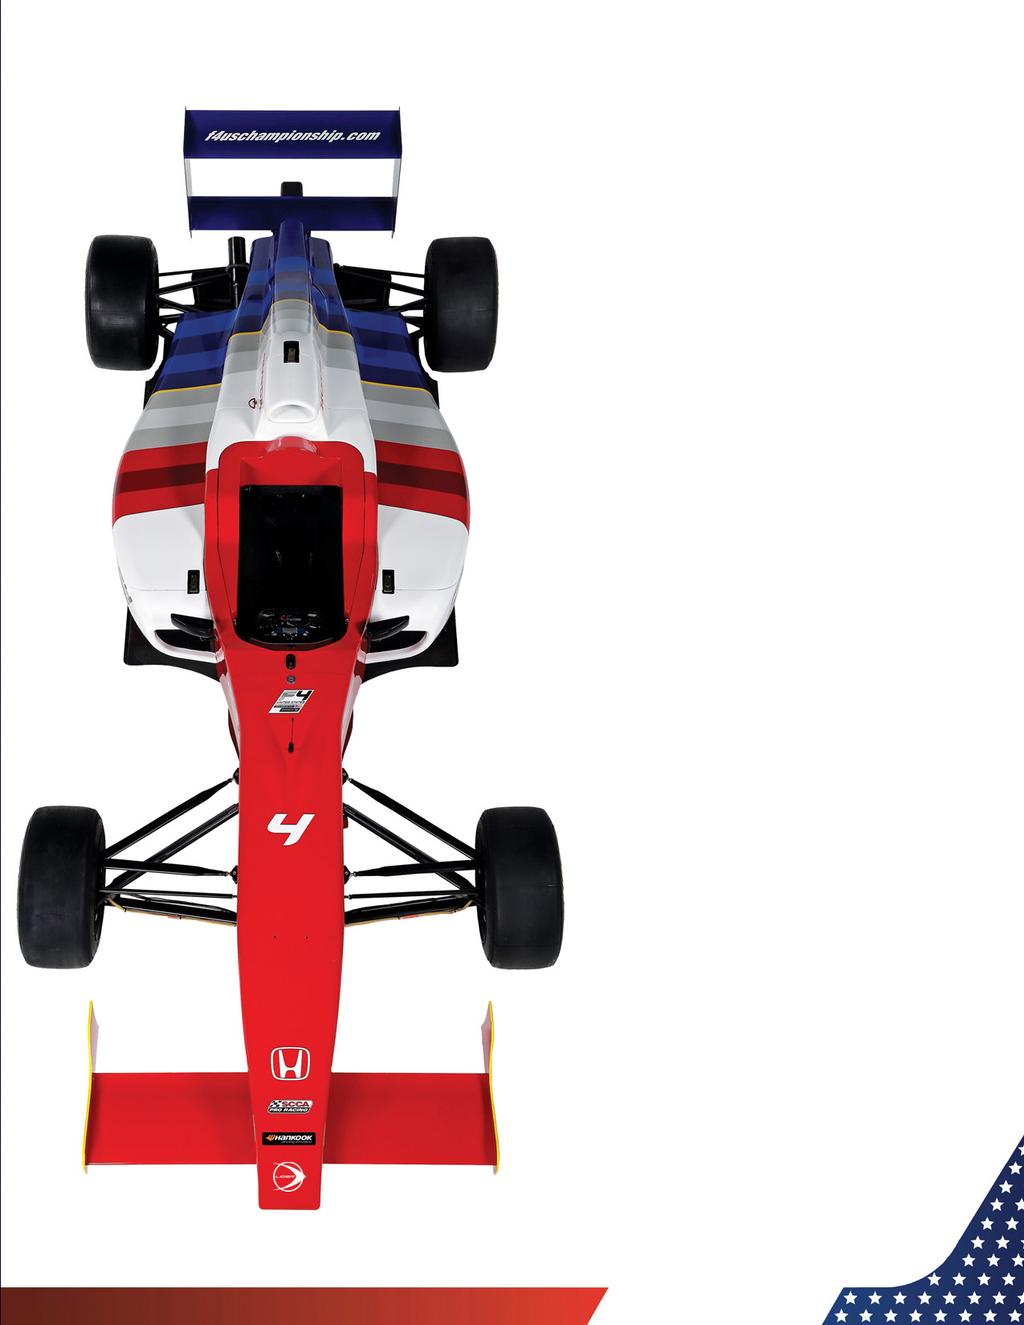 A Modern Approach to Motorsports Launched in 2014, FIA Formula 4 was created to offer young race car drivers around the world the opportunity to take the first step from karting into the world of